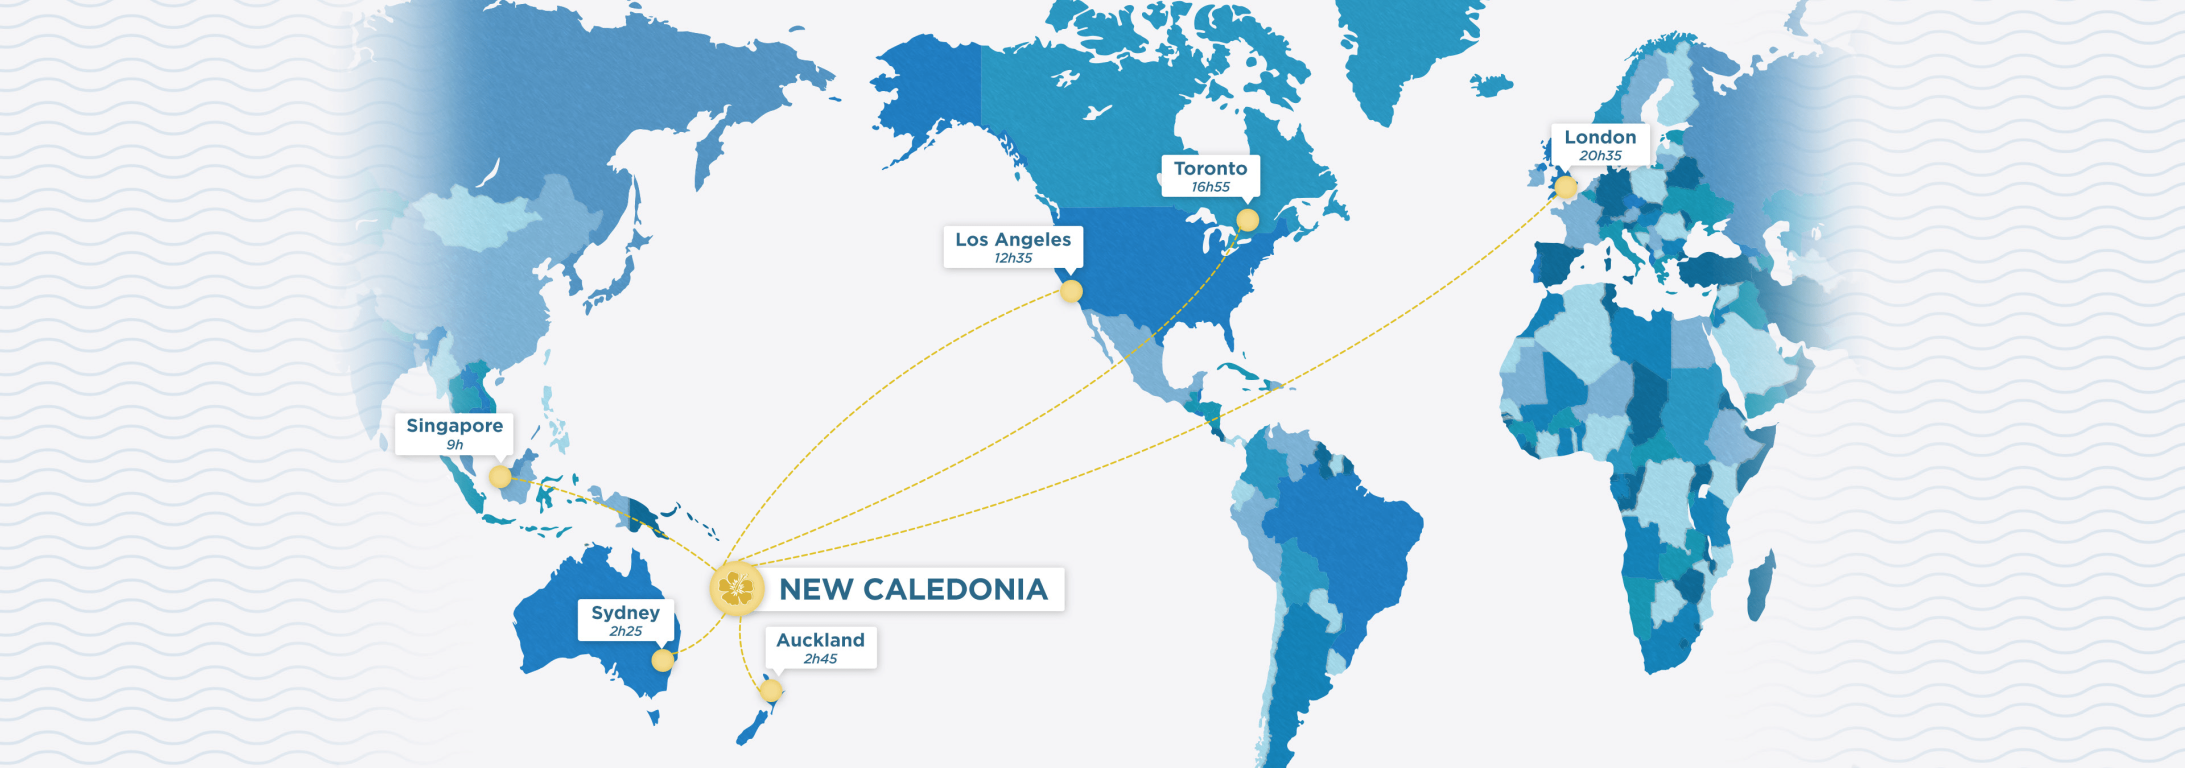 Map showing flight times from USA, Europe, Canada, Singapore, Australia and New Zealand from New Caledonia